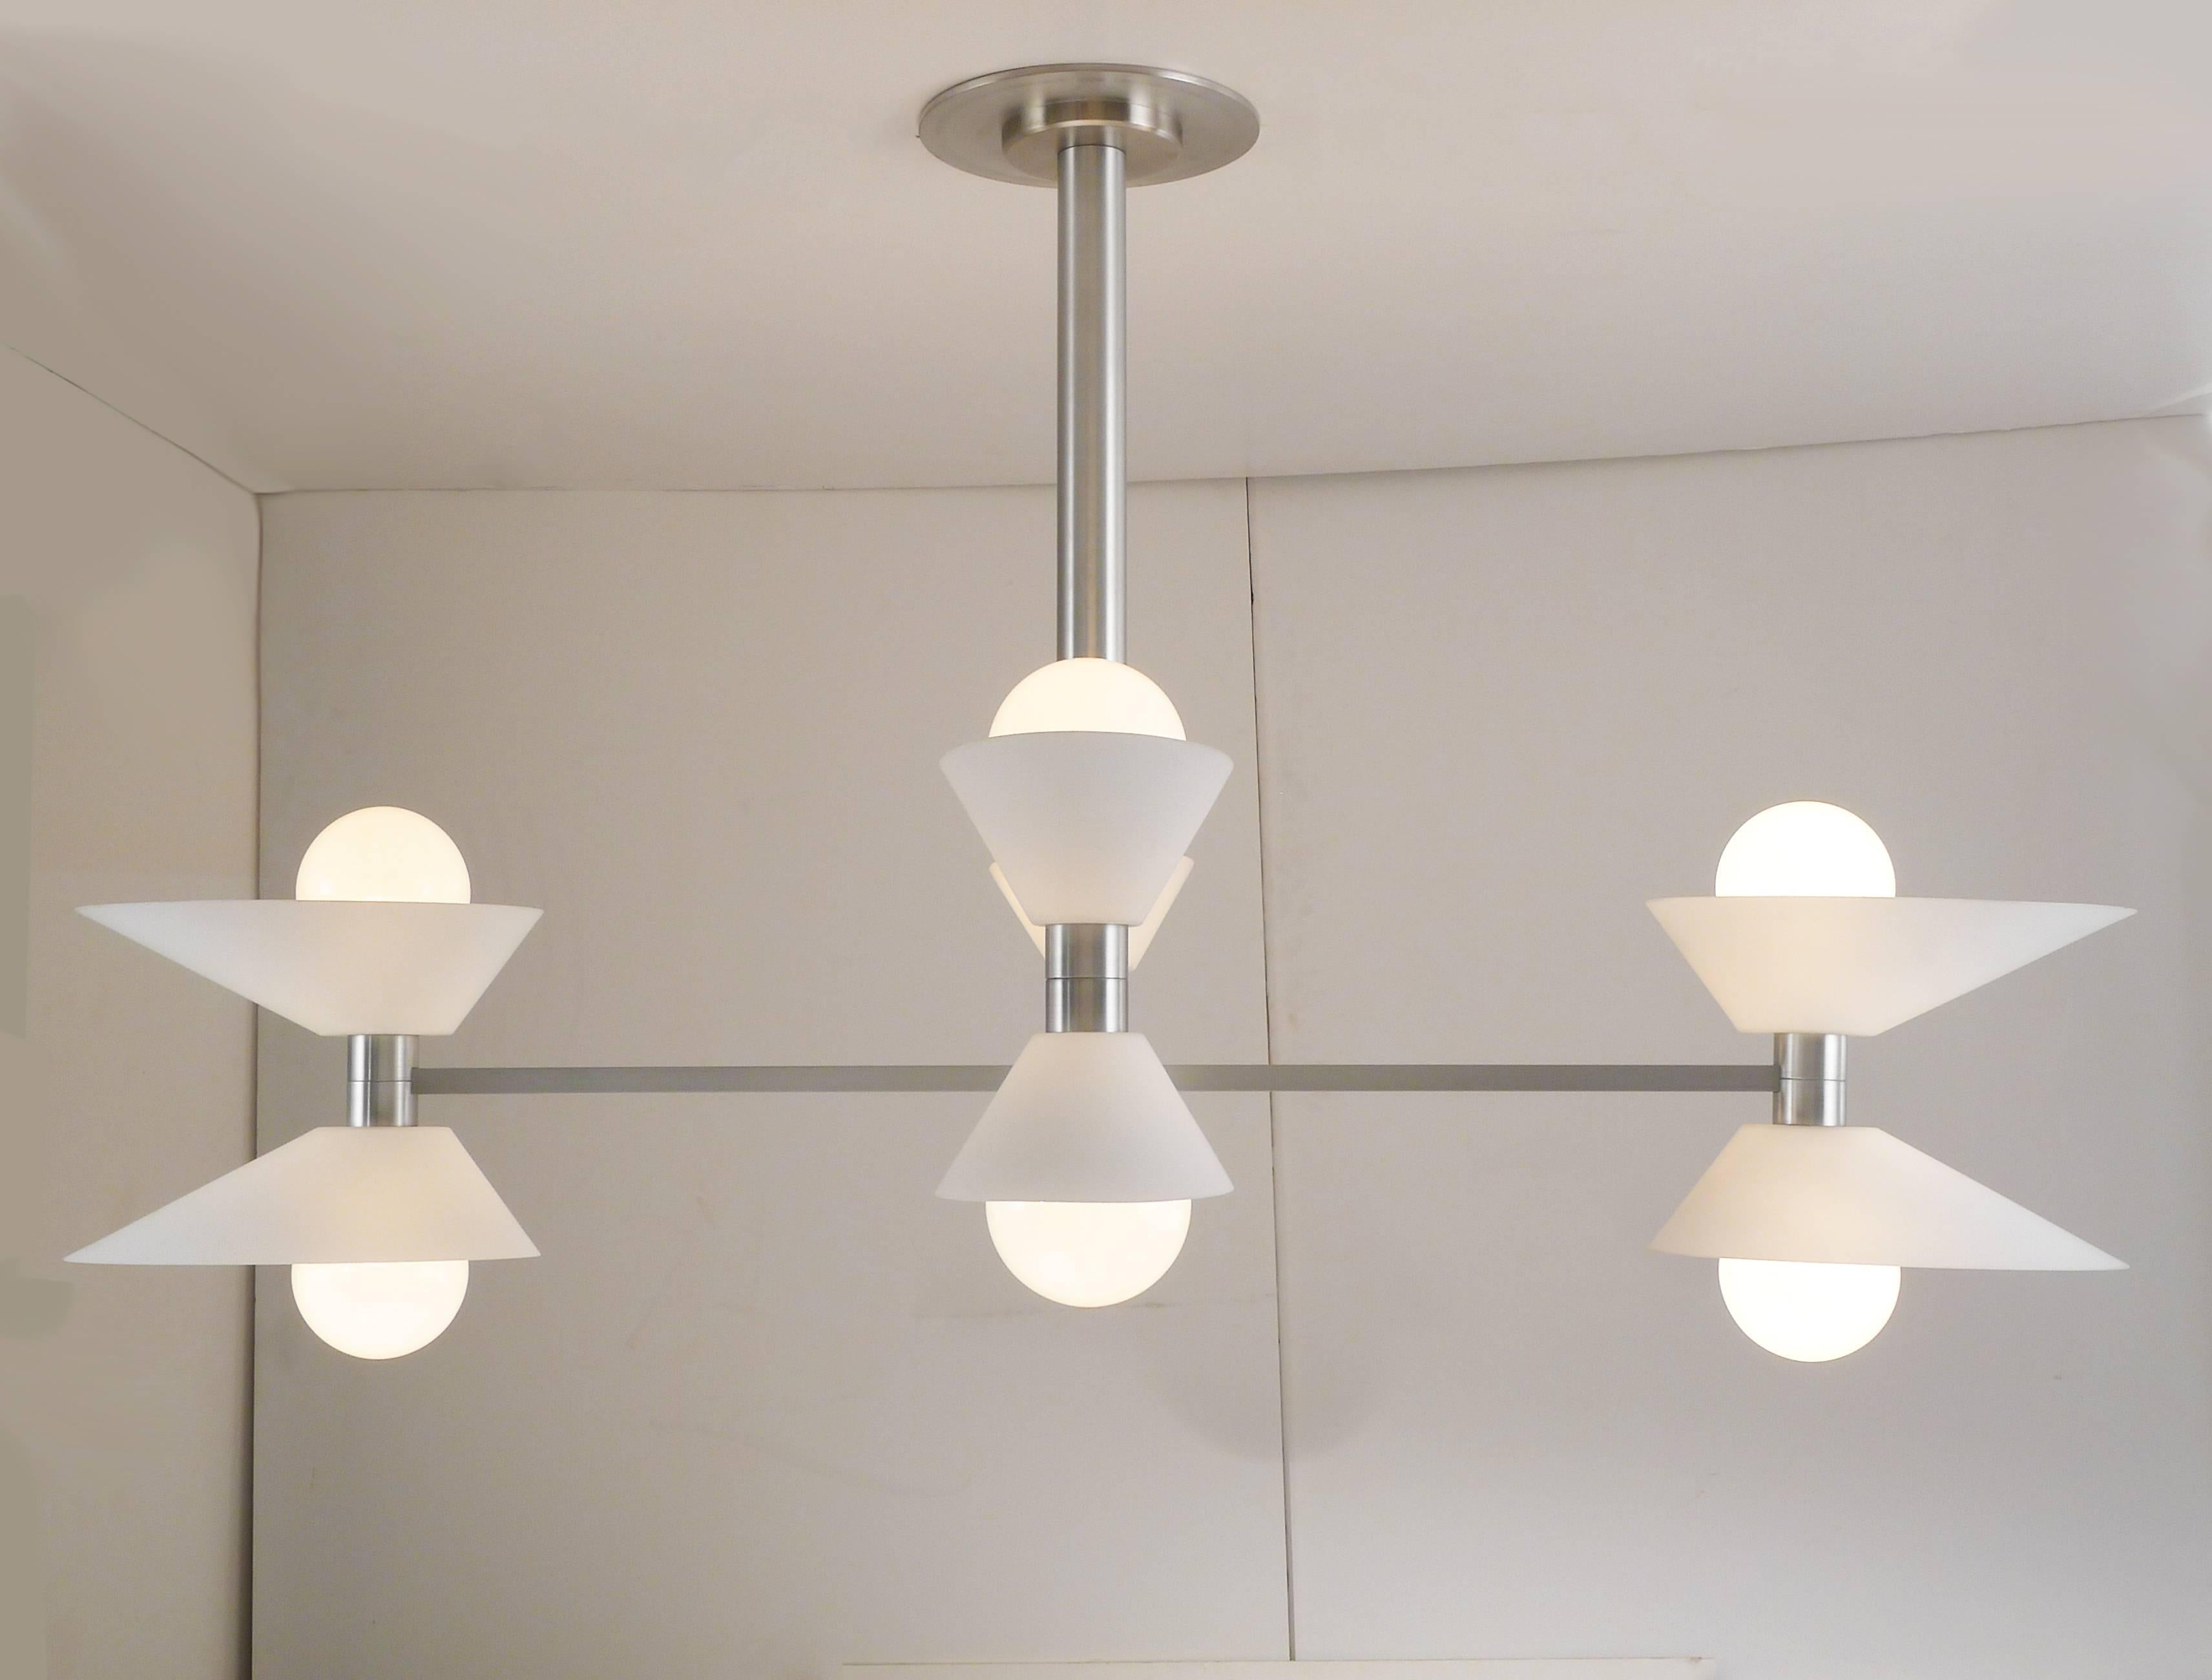 Mid-Century Modern chandelier white glass and machined aluminum.
Incandescent lamps. Designed by Architect, Sandy Littman.

Architect, Sandy Littman of Duesenberg LTD.  and The American Glass Light Company have been making beautiful objects and